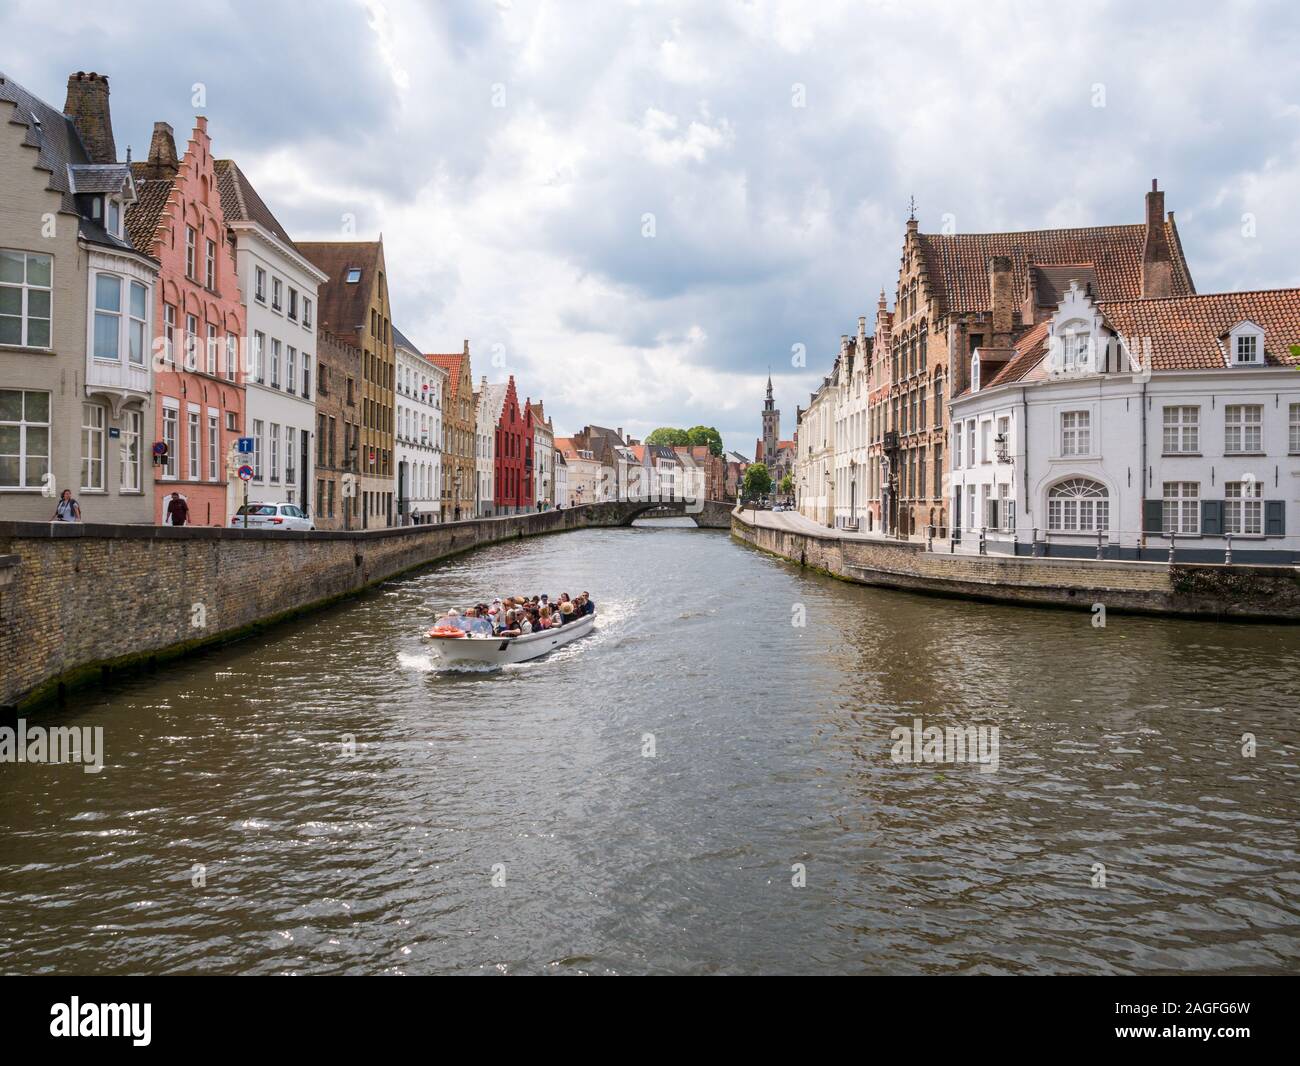 Boat tour on historic Spiegelrei canal in old town of Bruges, Belgium Stock Photo